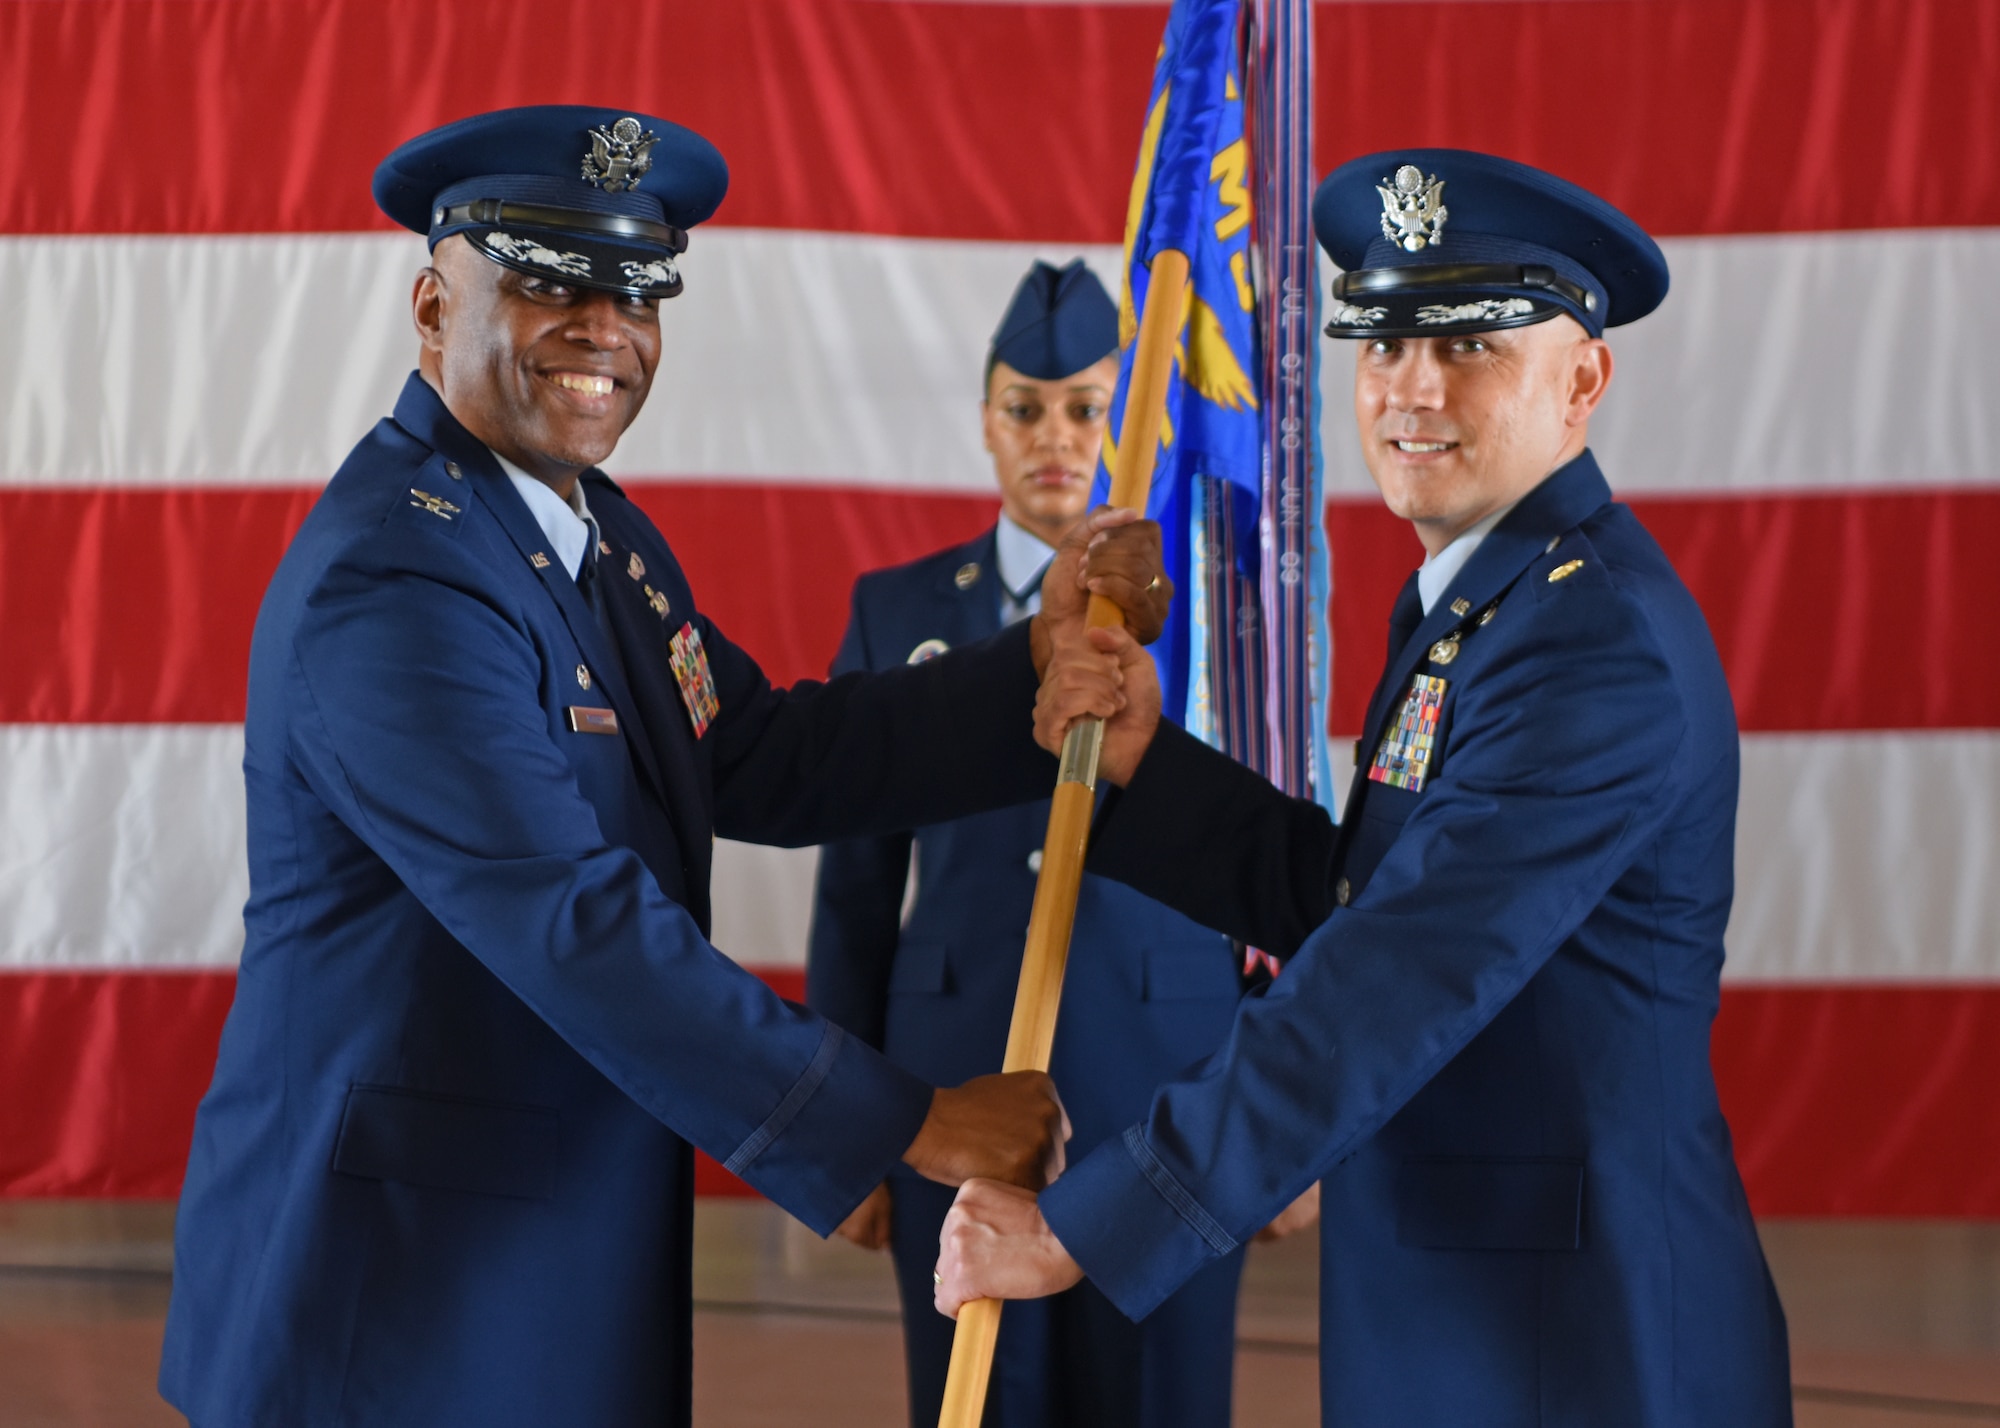 U.S. Air Force Maj. Jose Quintanilla, 17th Logistics Readiness Squadron incoming commander, (right) assumes command from Col. Eugene Moore III, 17th Mission Support Group commander, during the 17th LRS change of command ceremony at Goodfellow Air Force Base, Texas, May 20, 2022. Changes of command are a military tradition representing the transfer of responsibilities from the presiding official to the upcoming official. (U.S. Air Force photo by Senior Airman Ethan Sherwood)